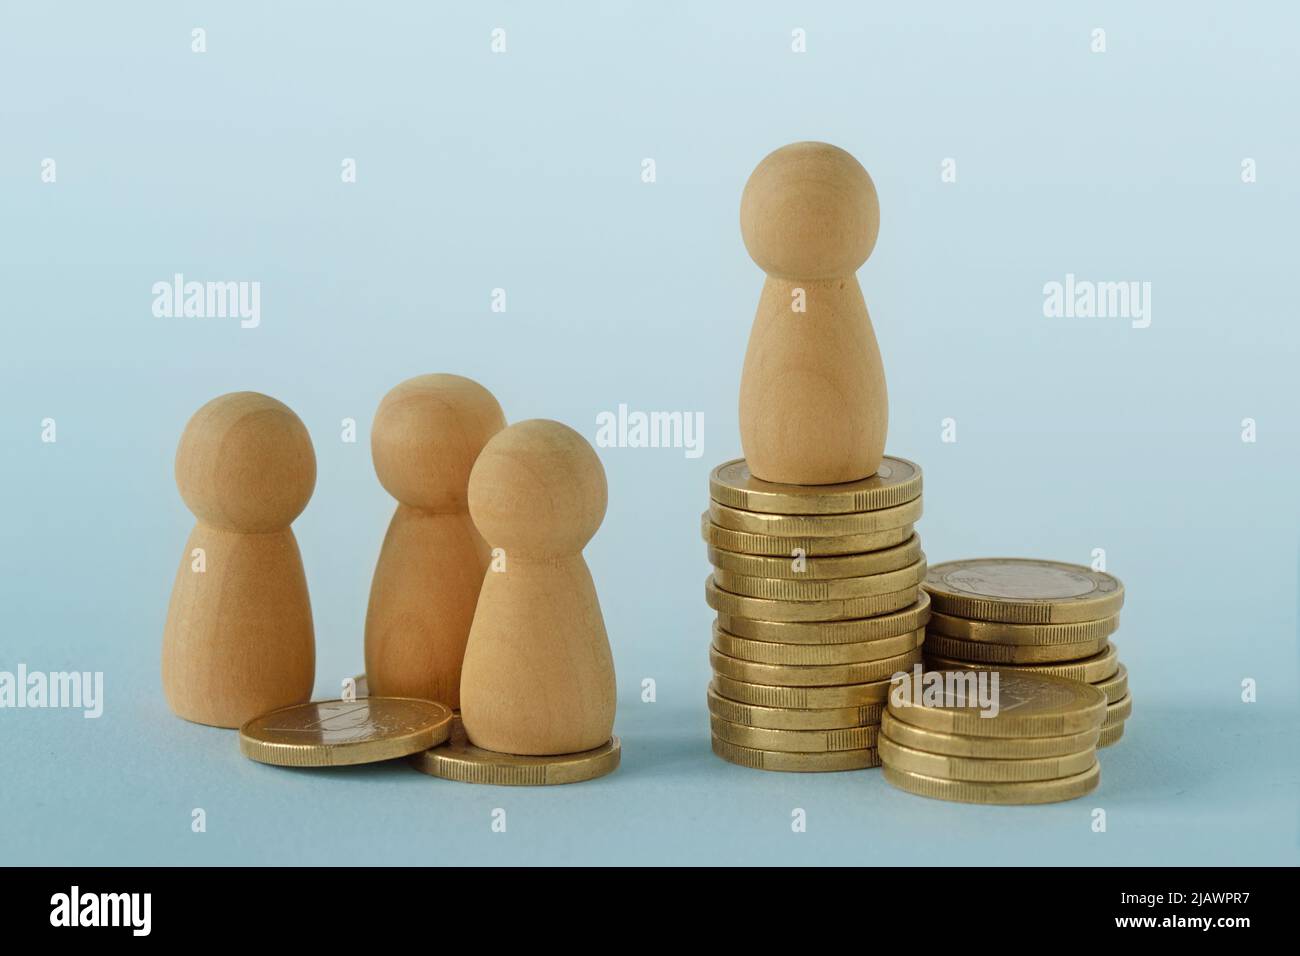 Pawns with stacks of coins - Concept of social and economic inequality Stock Photo